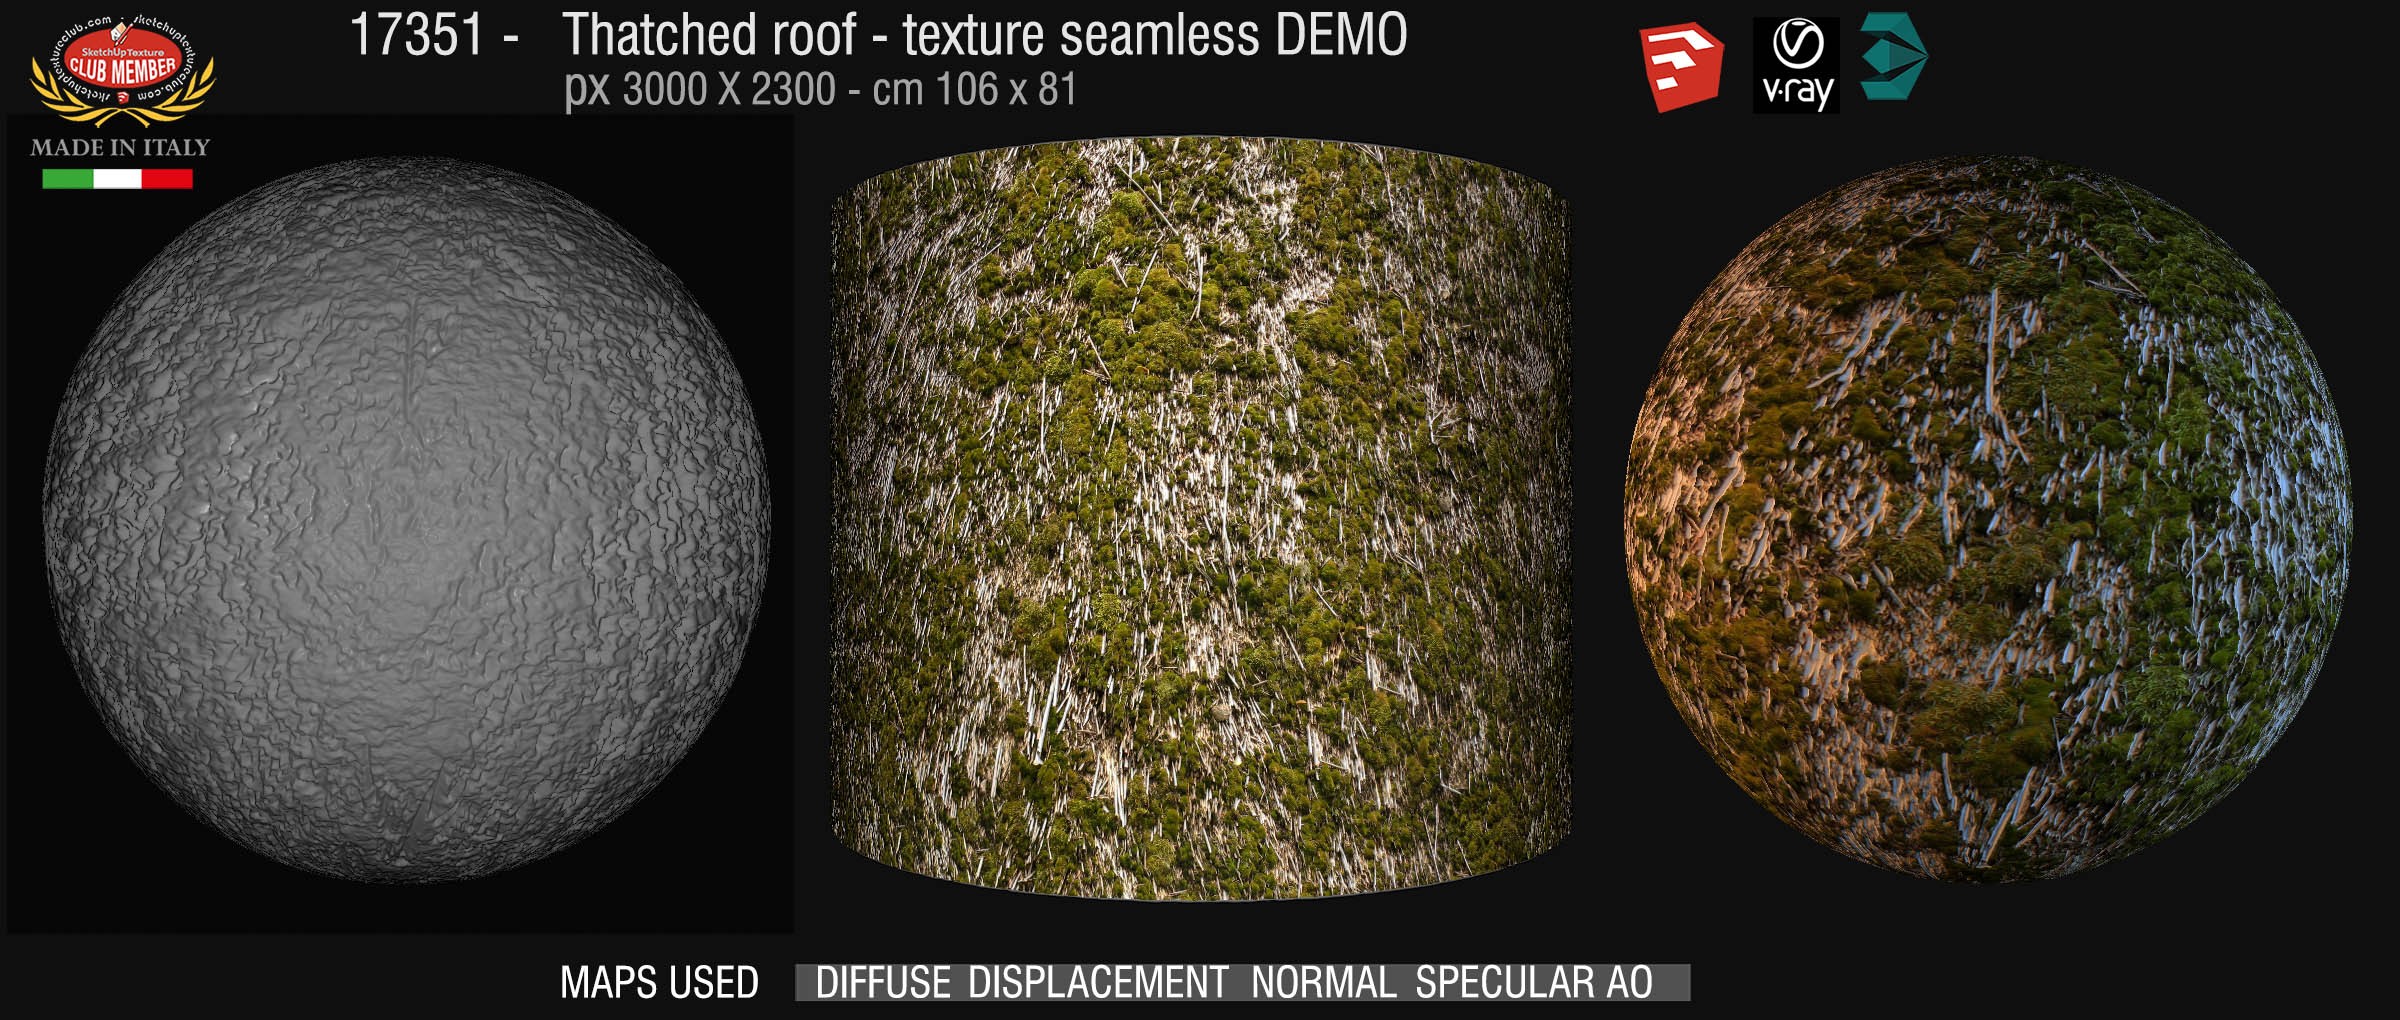 17351 Thatched roof texture seamless + maps DEMO